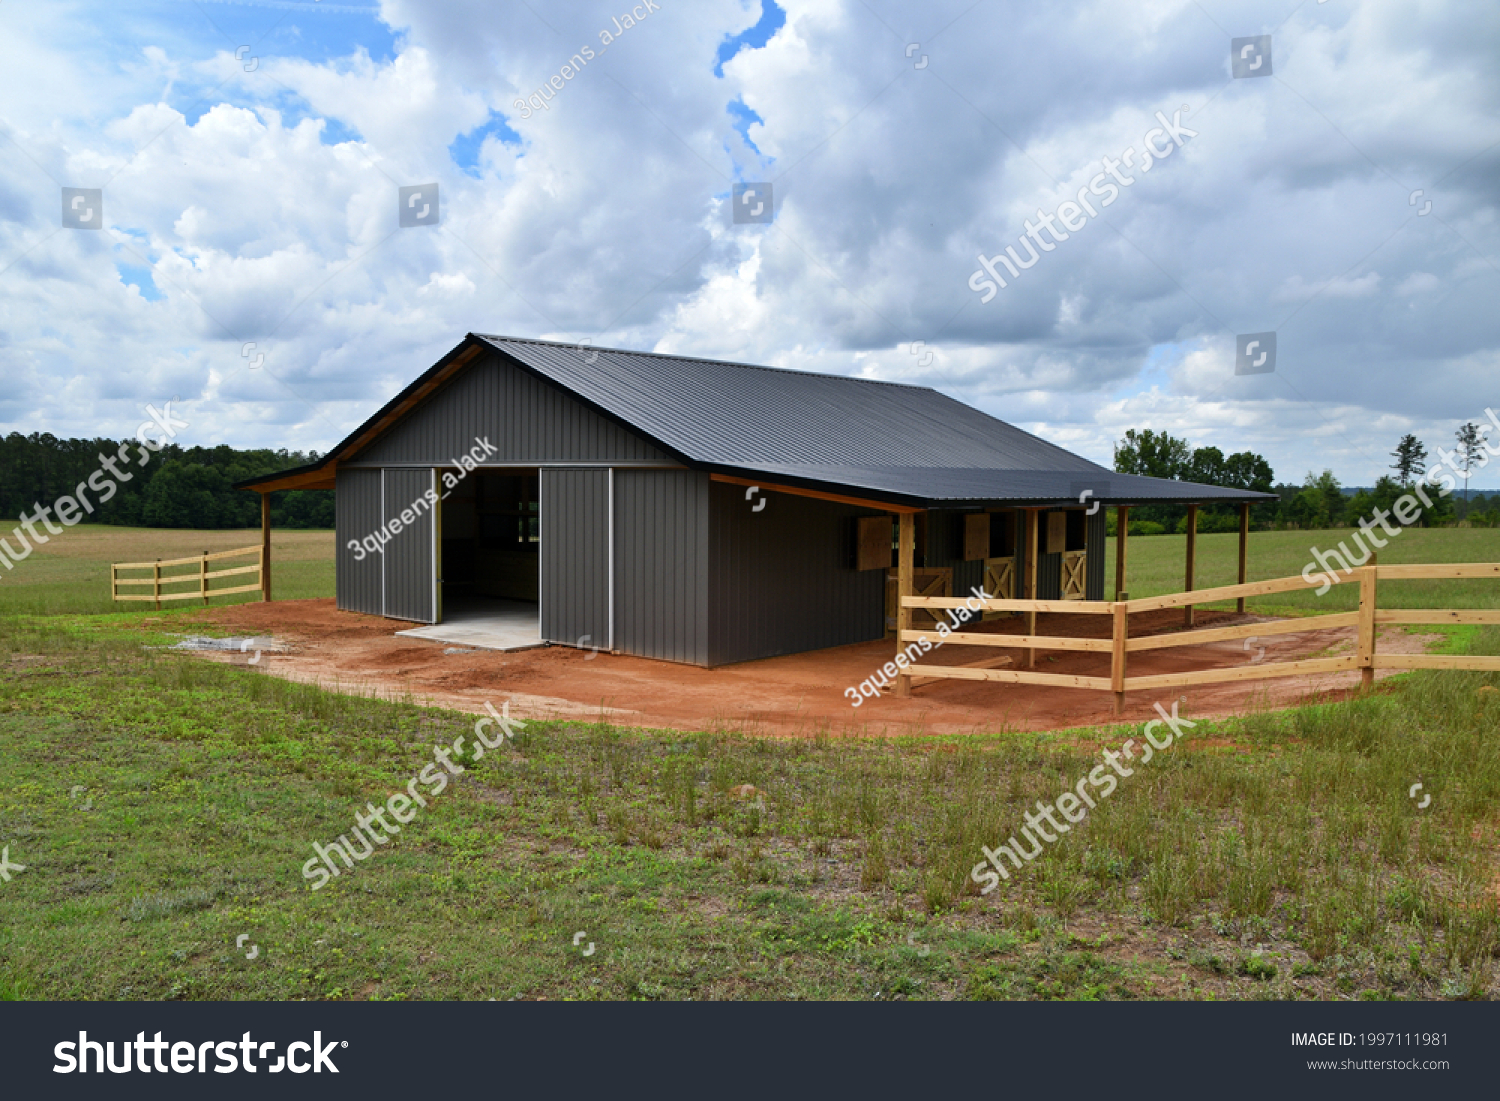 Horse barn built with post frame materials; two lean-to's, two sliding barn doors, six stalls, concrete floor #1997111981